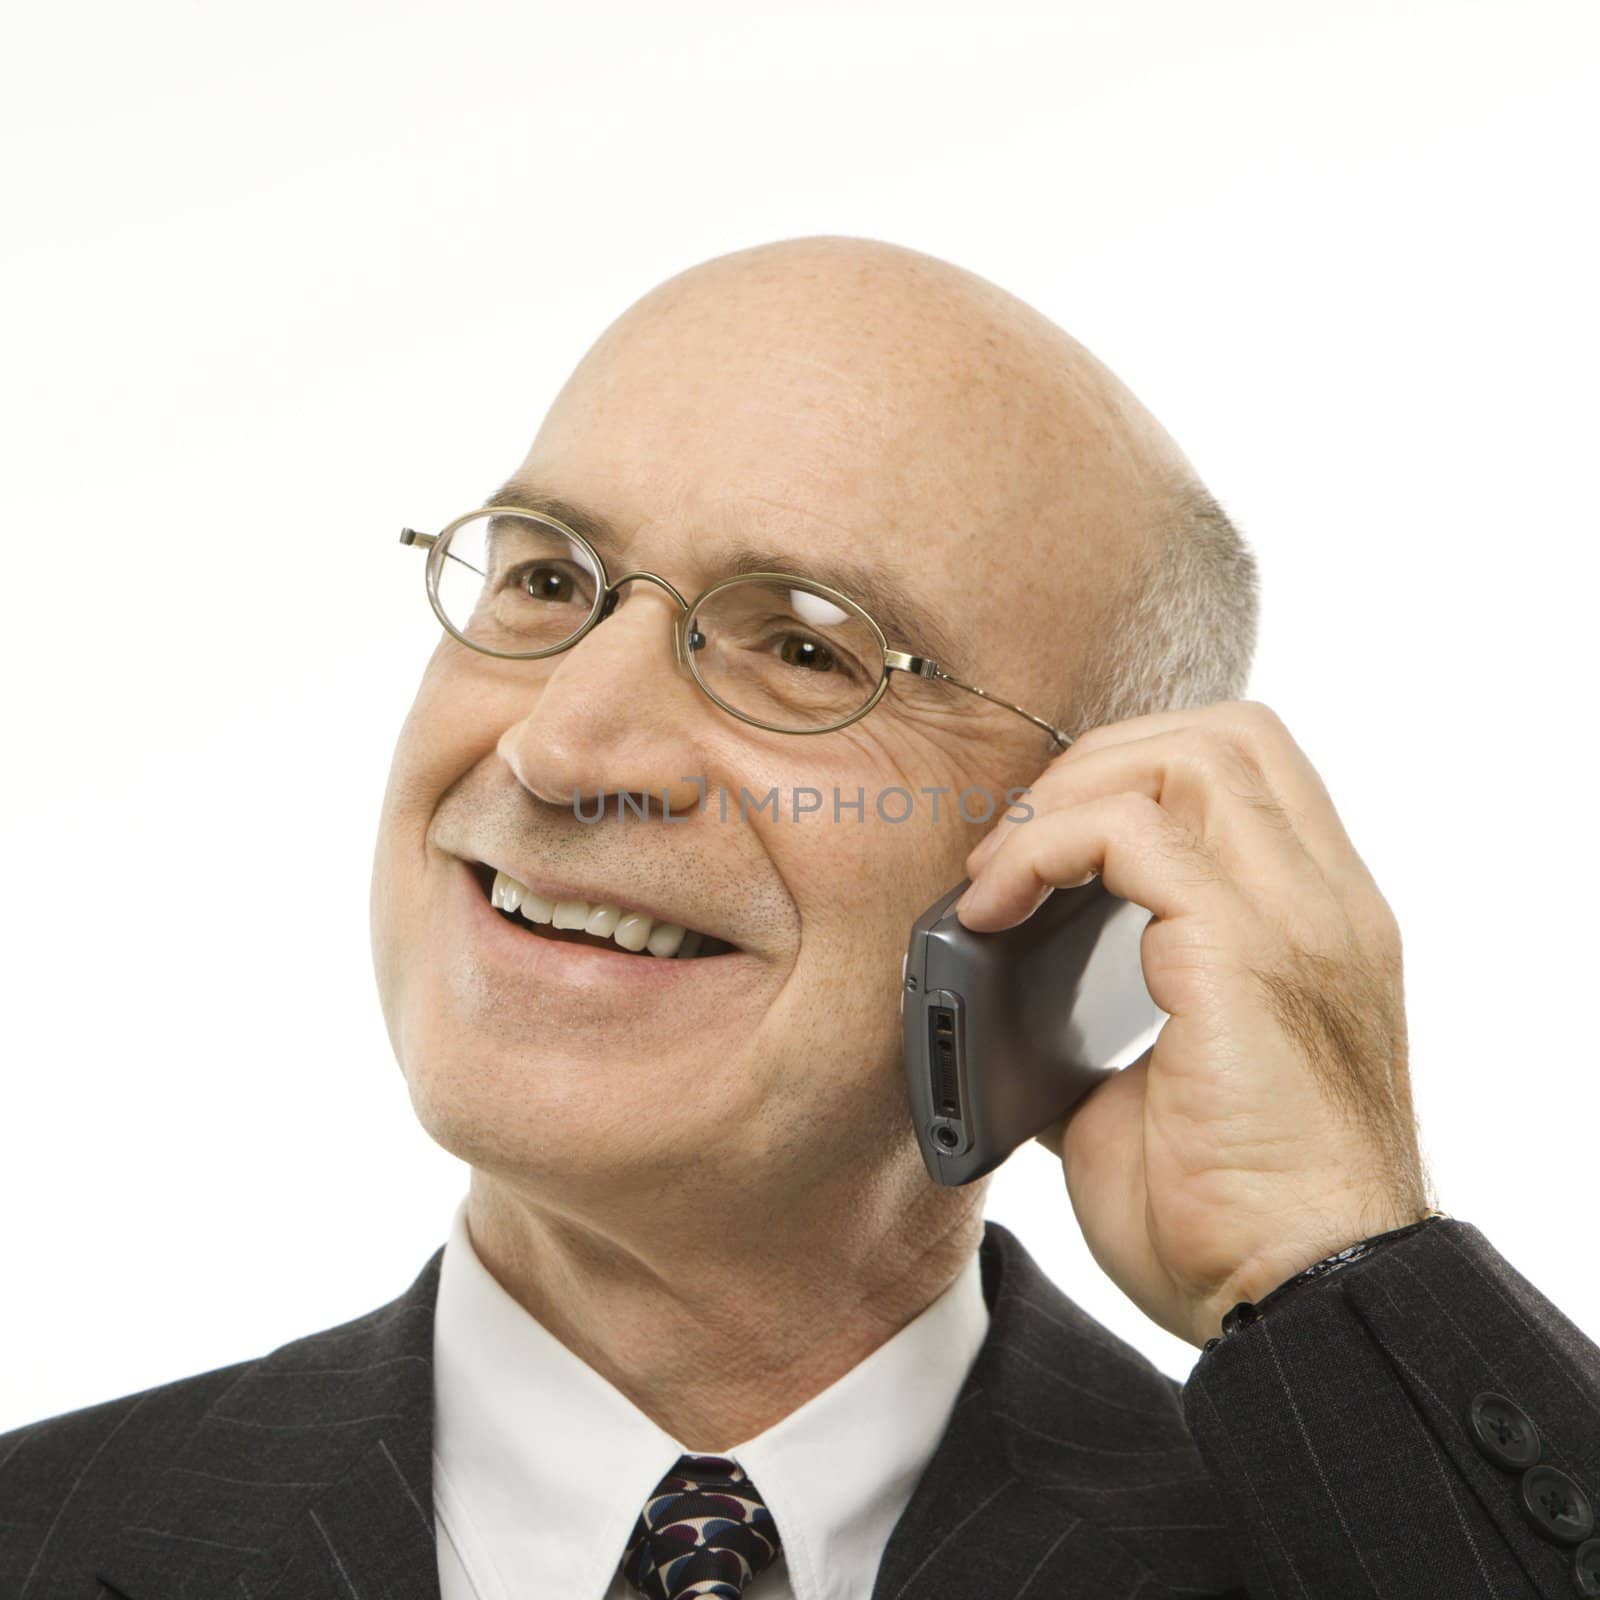 Caucasian middle-aged businessman talking on cellphone smiling against white background.